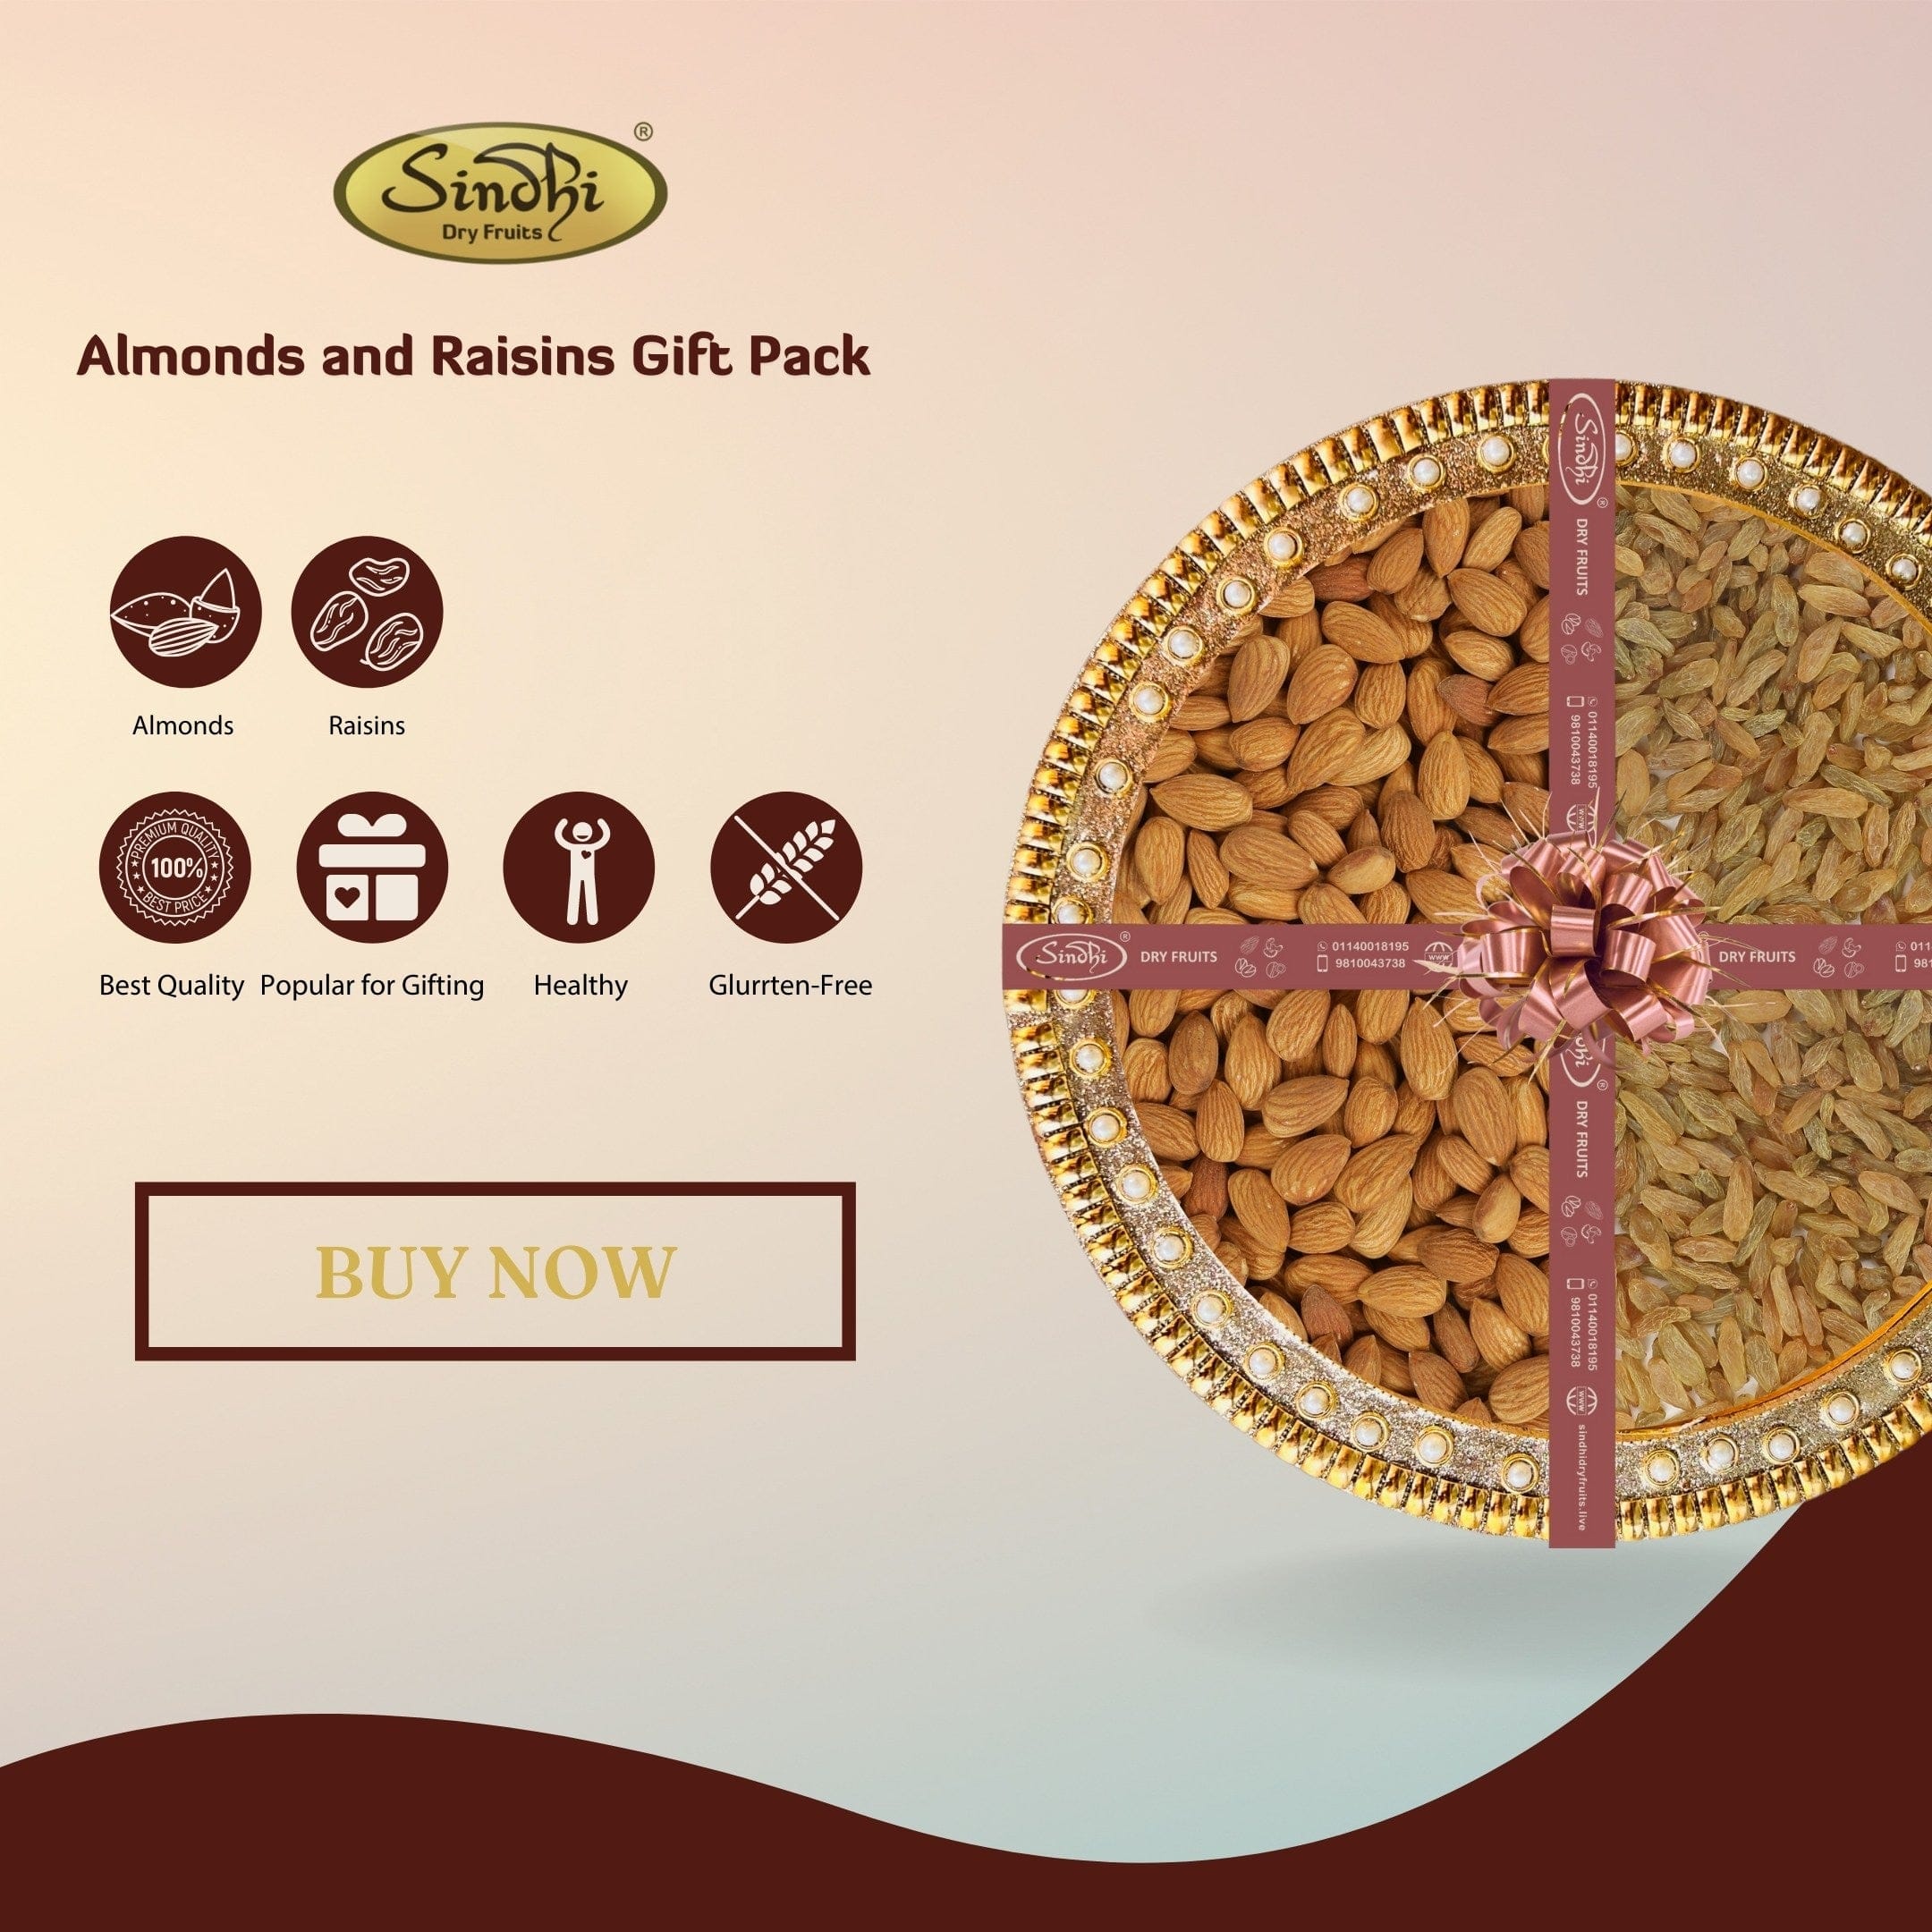 Gift Pack Containing California Almonds and Green Long Raisins - Sindhi Dry Fruits